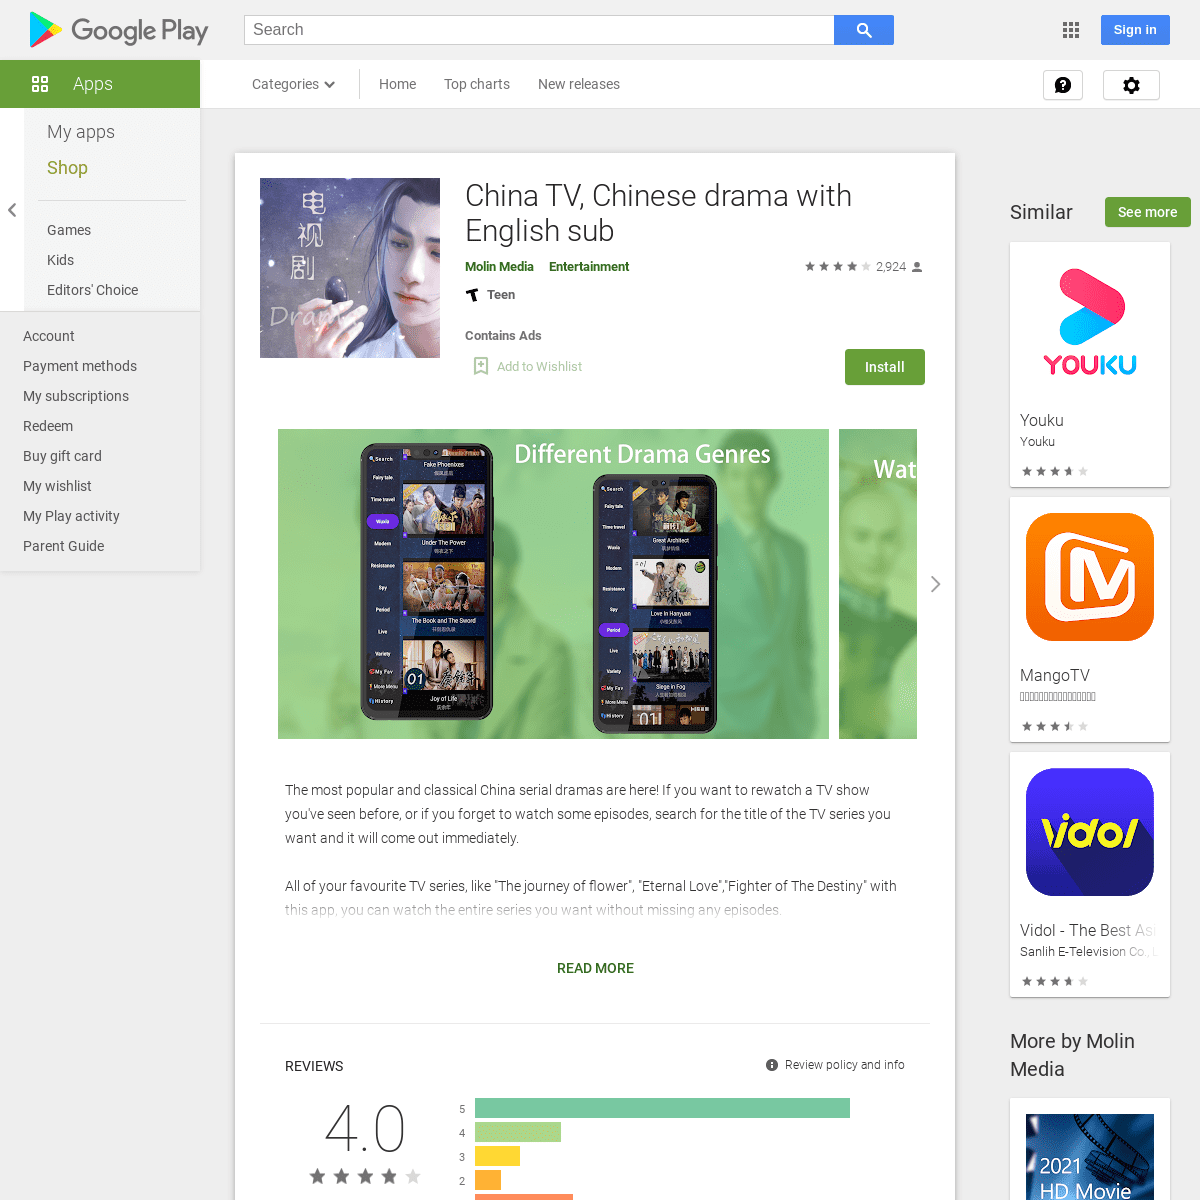 A complete backup of https://play.google.com/store/apps/details?id=com.molinmedia.chinesedrama&hl=en_US&gl=US